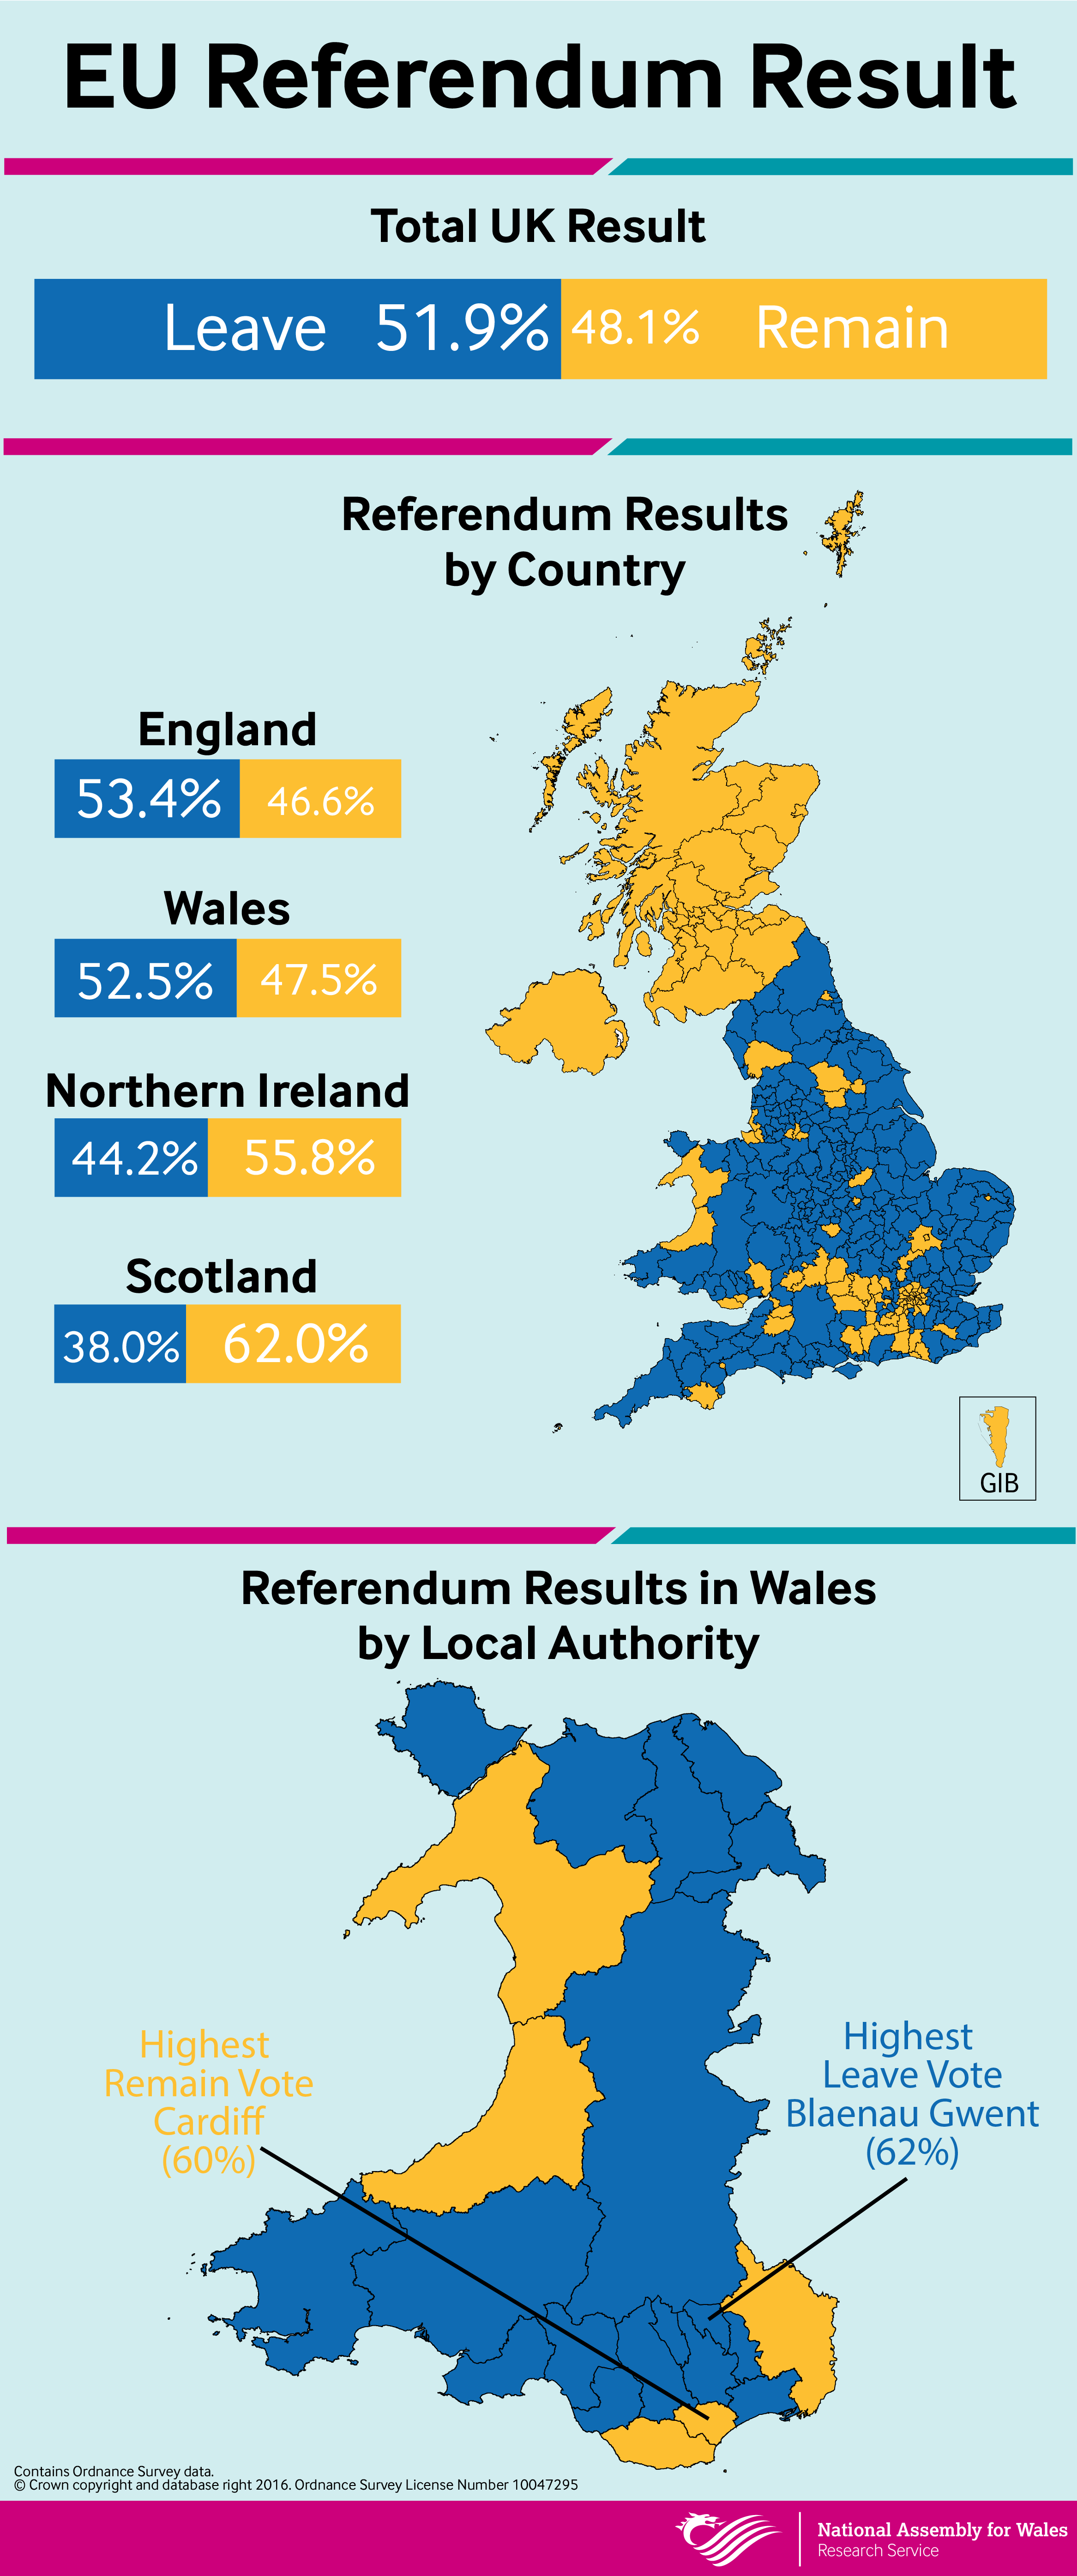 Infographic showing the EU referendum results by local authority